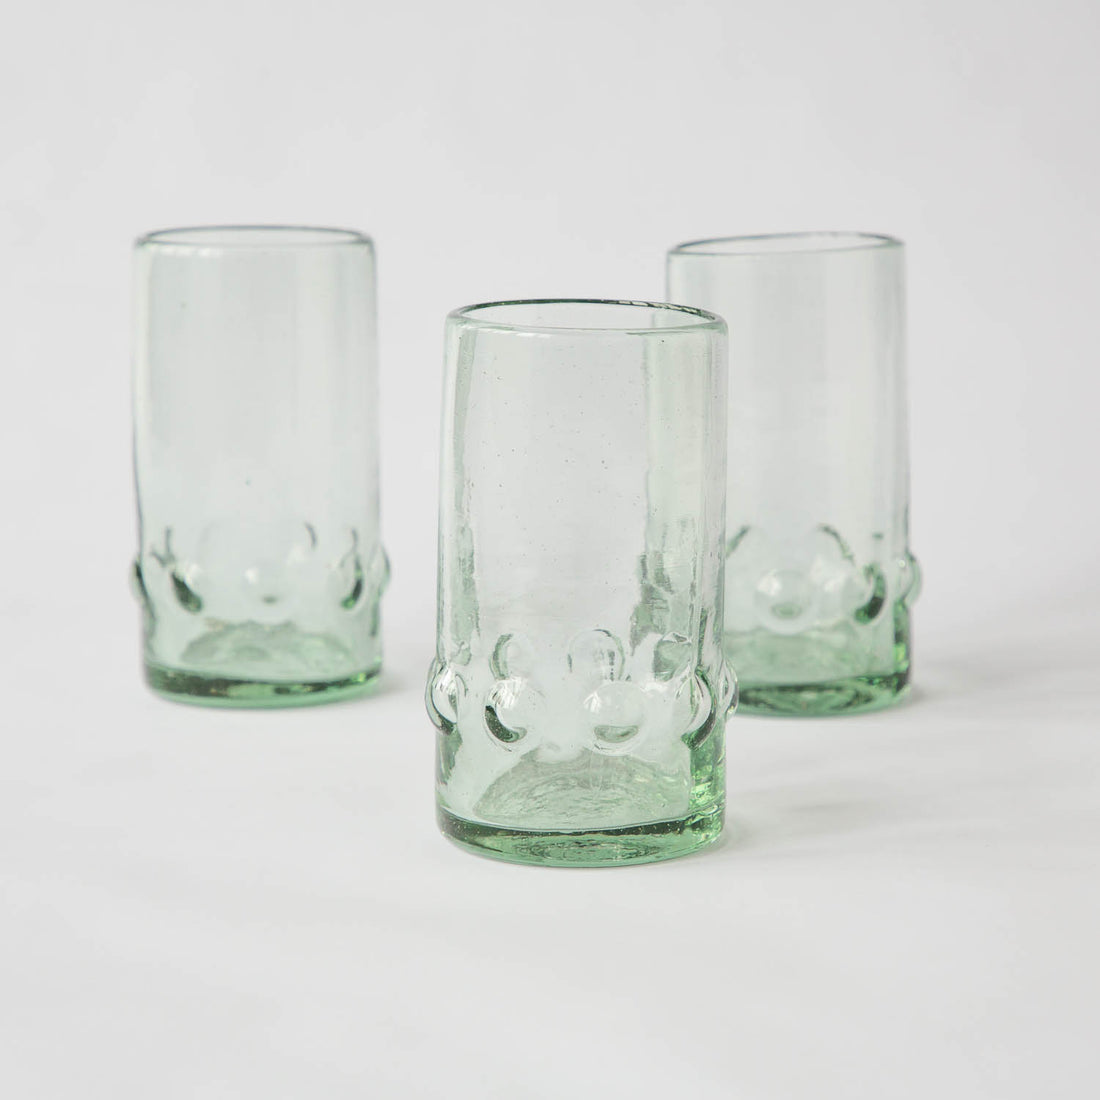 Handblown Mexican Drinking Glasses (Set of 4)